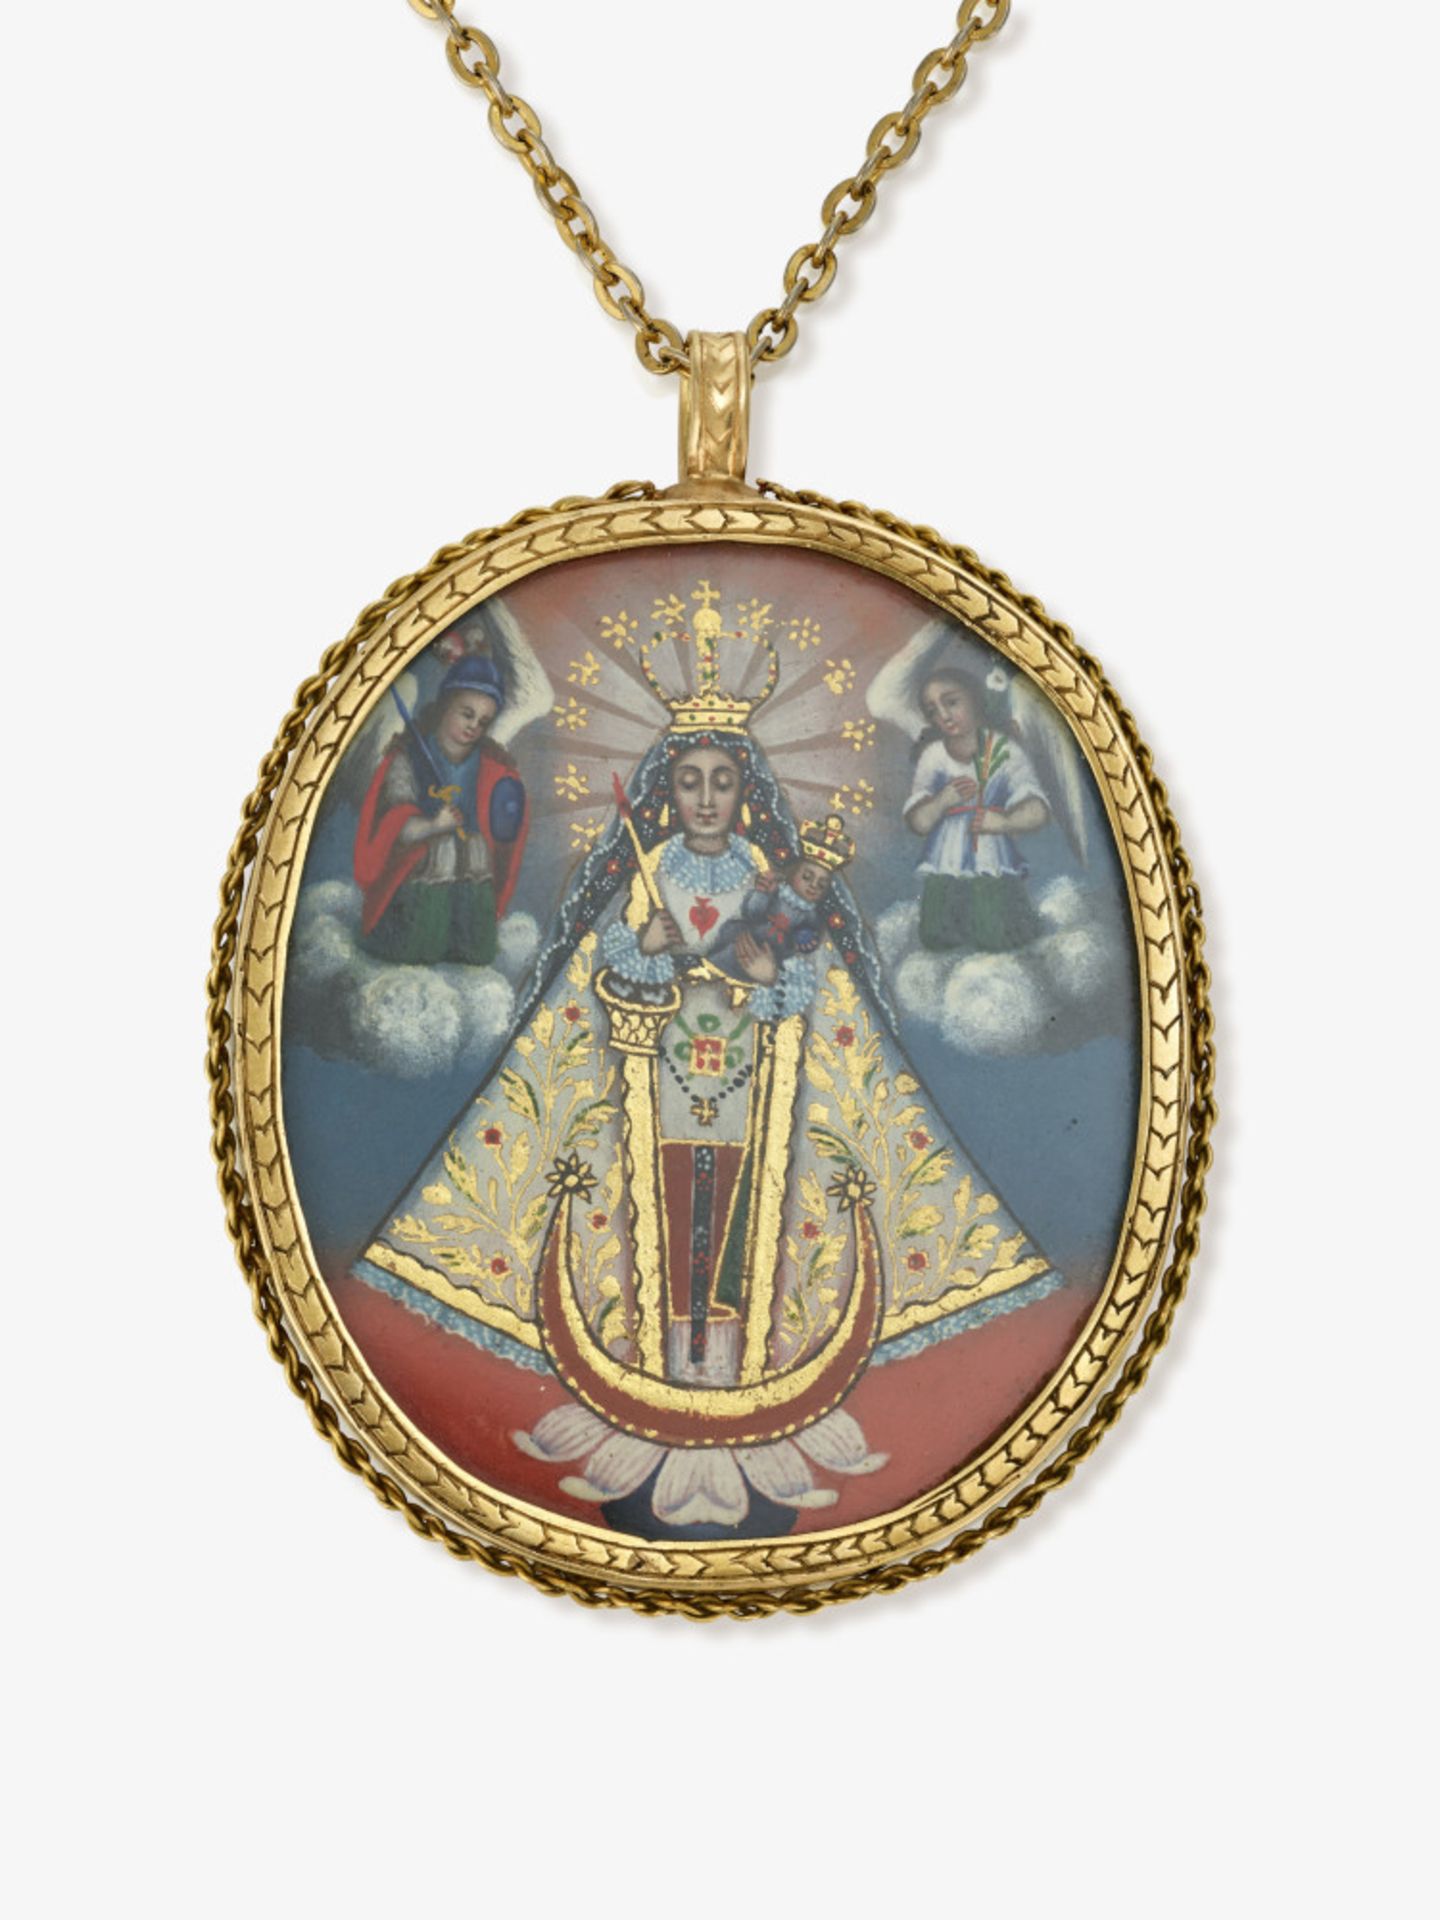 A pilgrimage pendant - Spain, Portugal or South America, 19th century